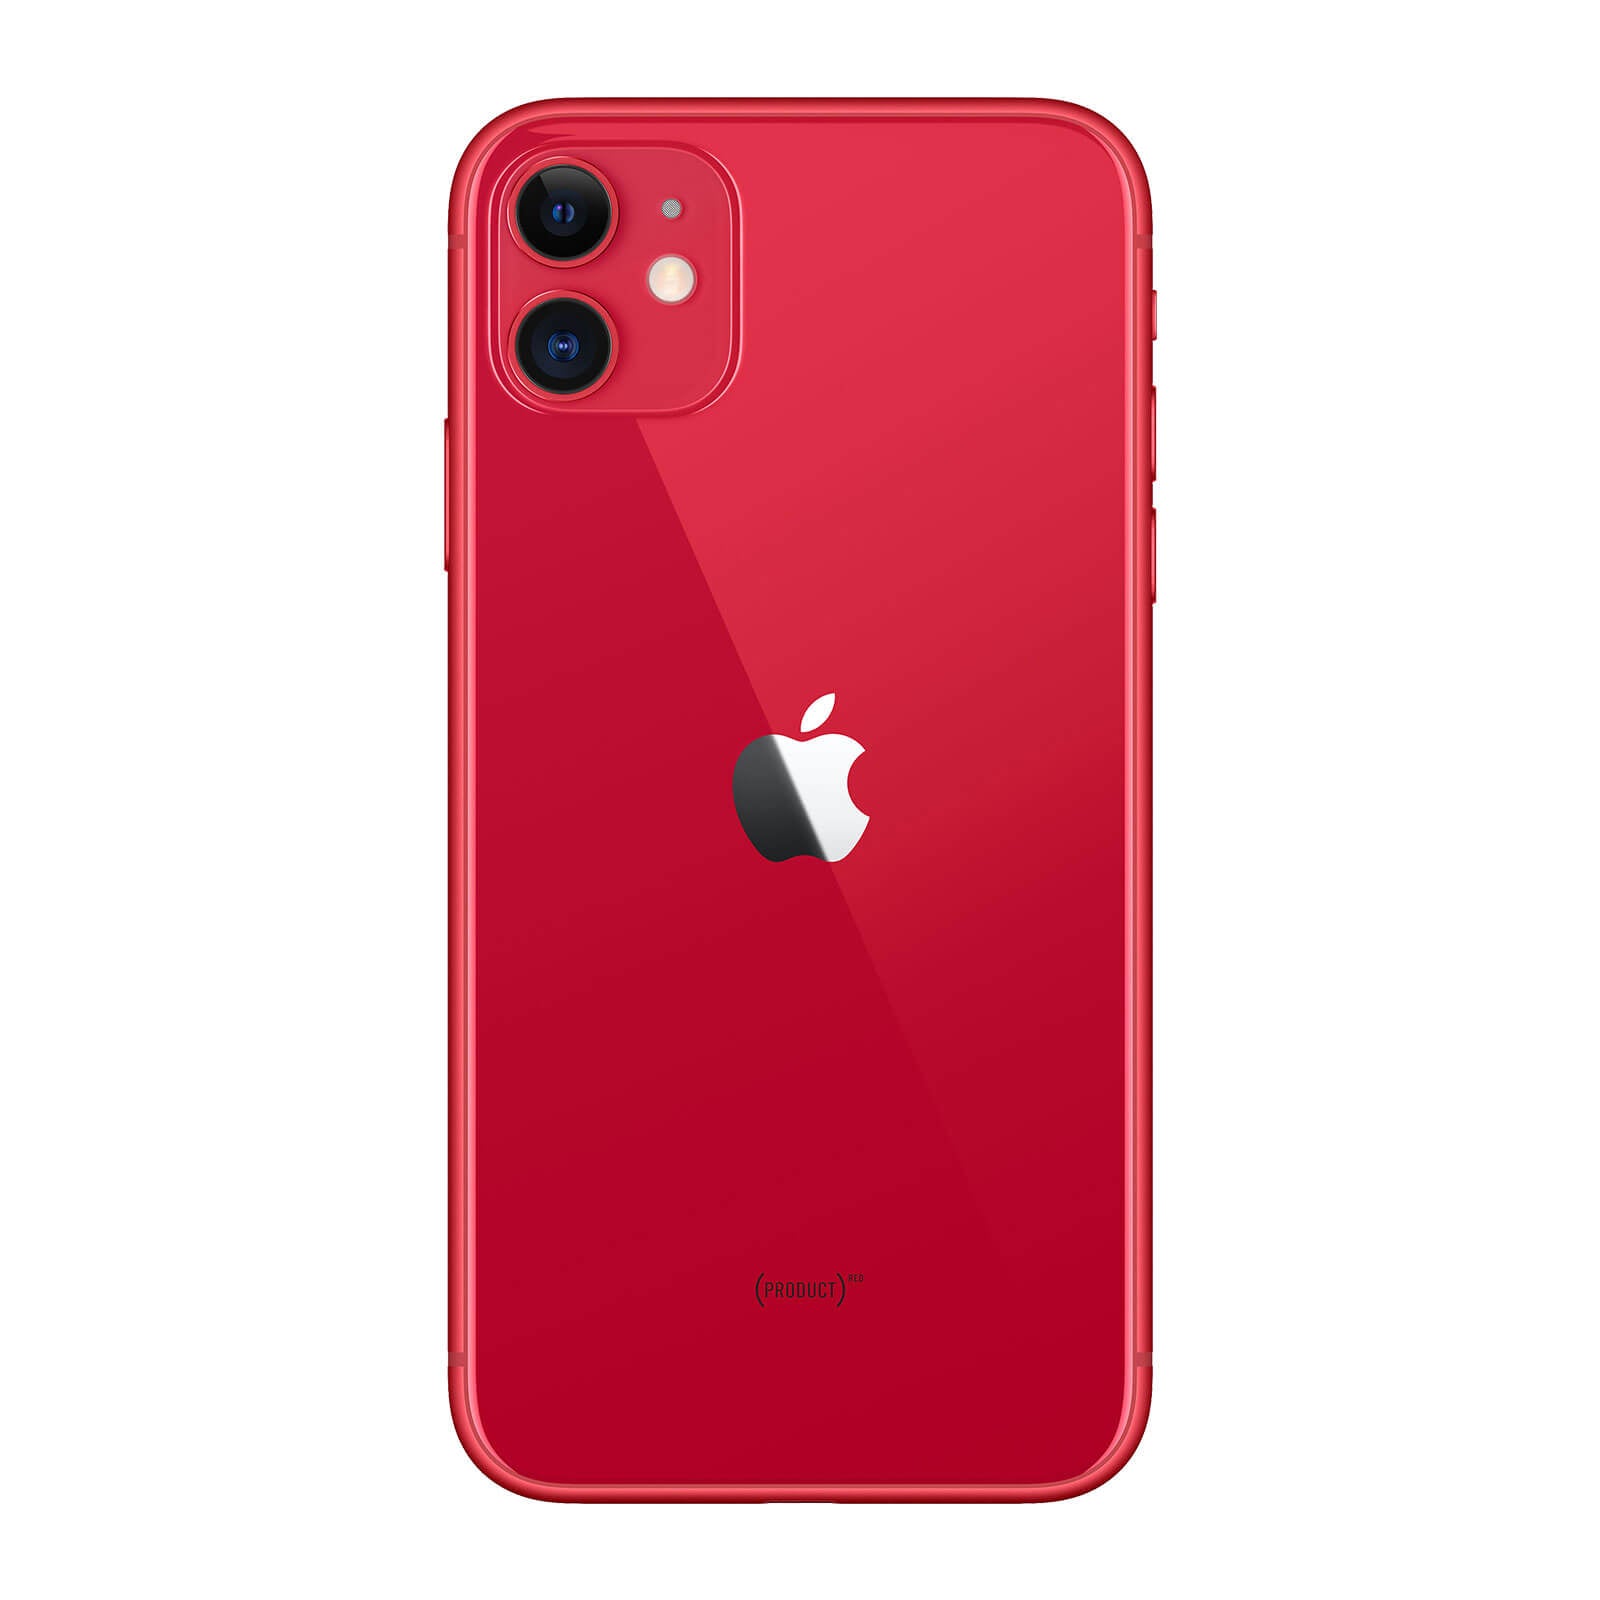 Apple iPhone 11 64GB Product Red Good - Unlocked